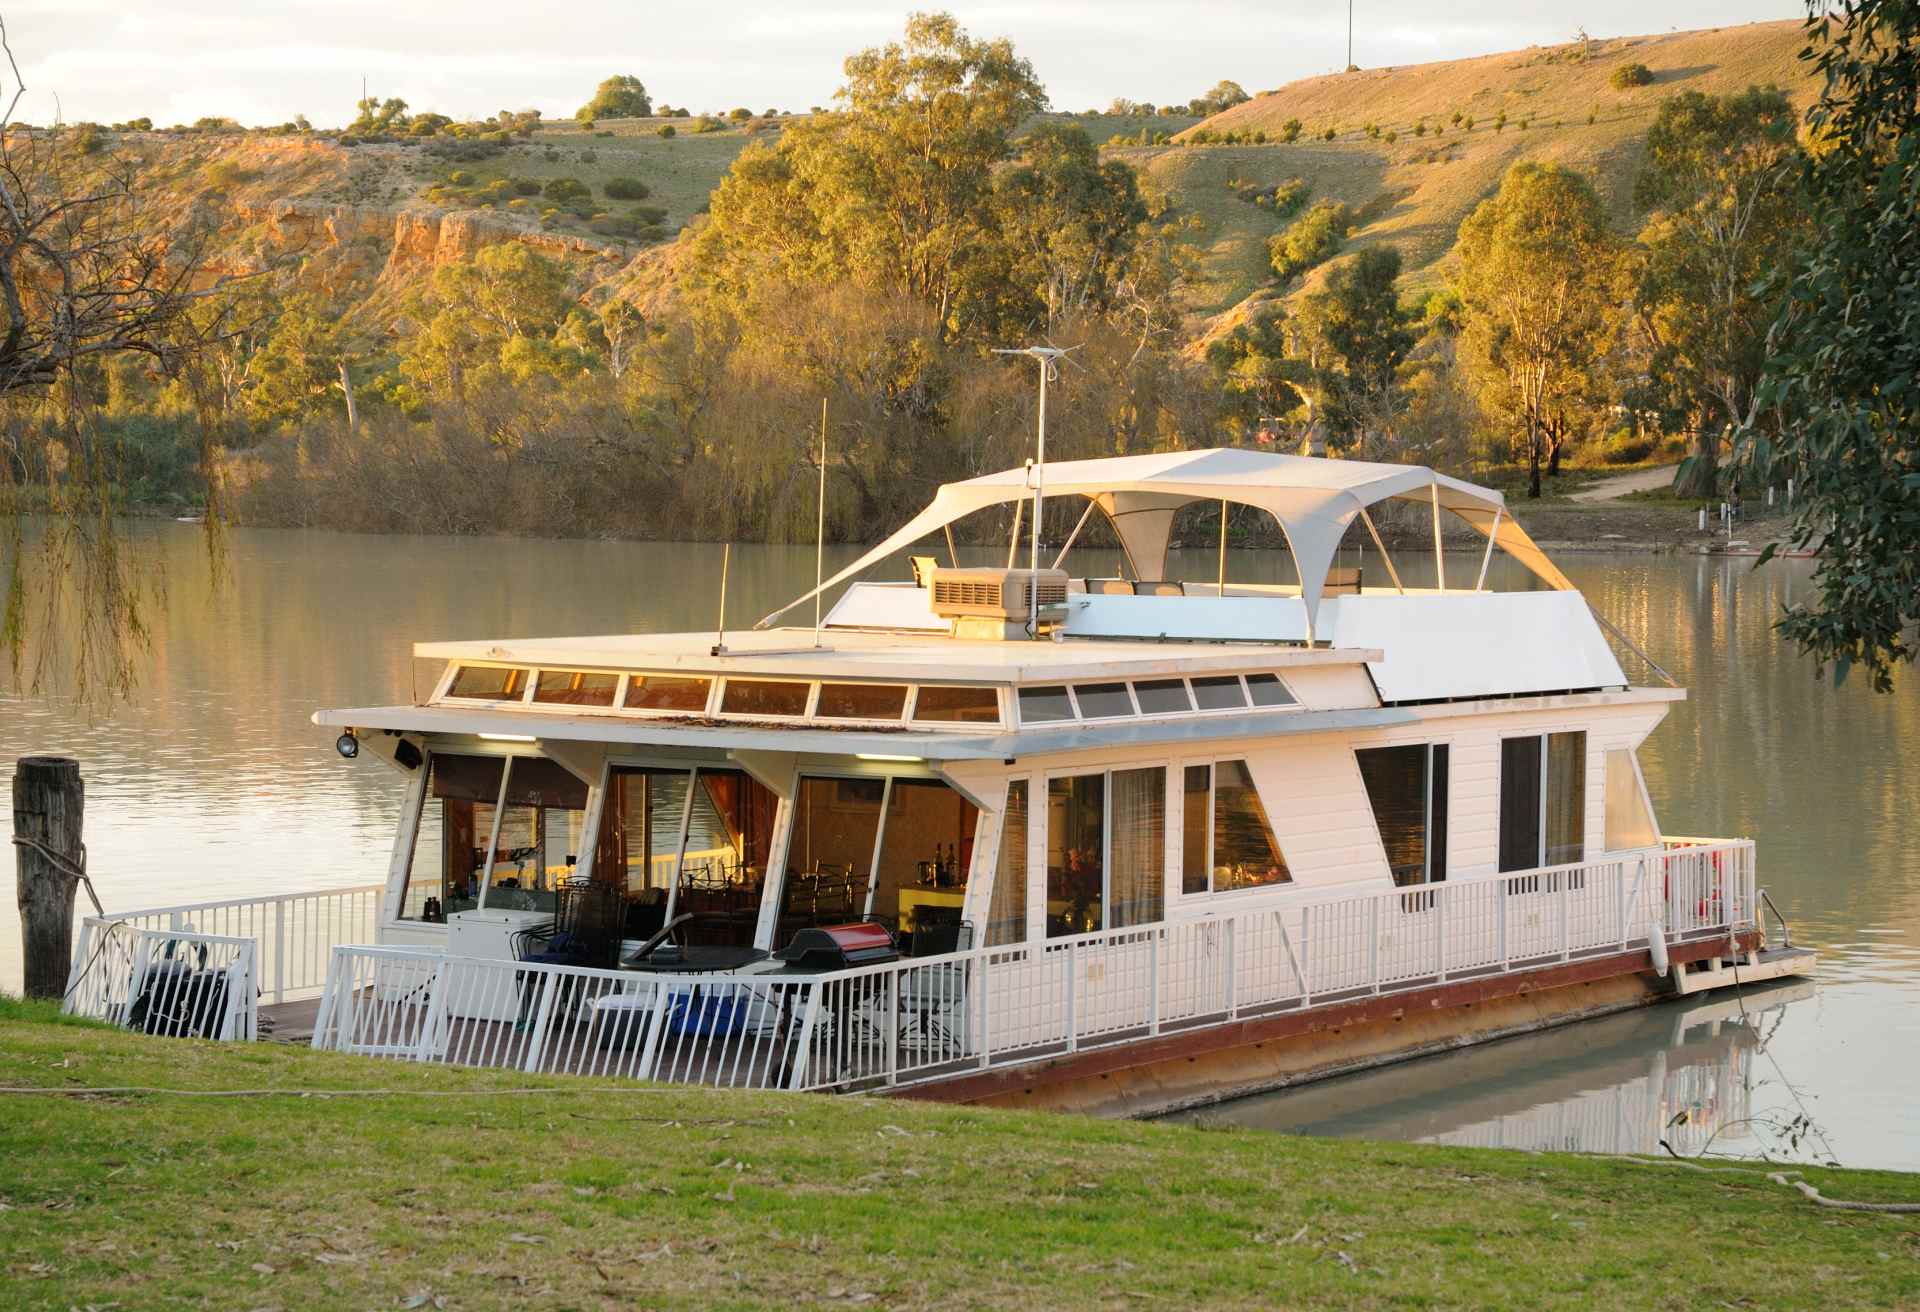 Houseboat at sunset docked on River Murray, South Australia